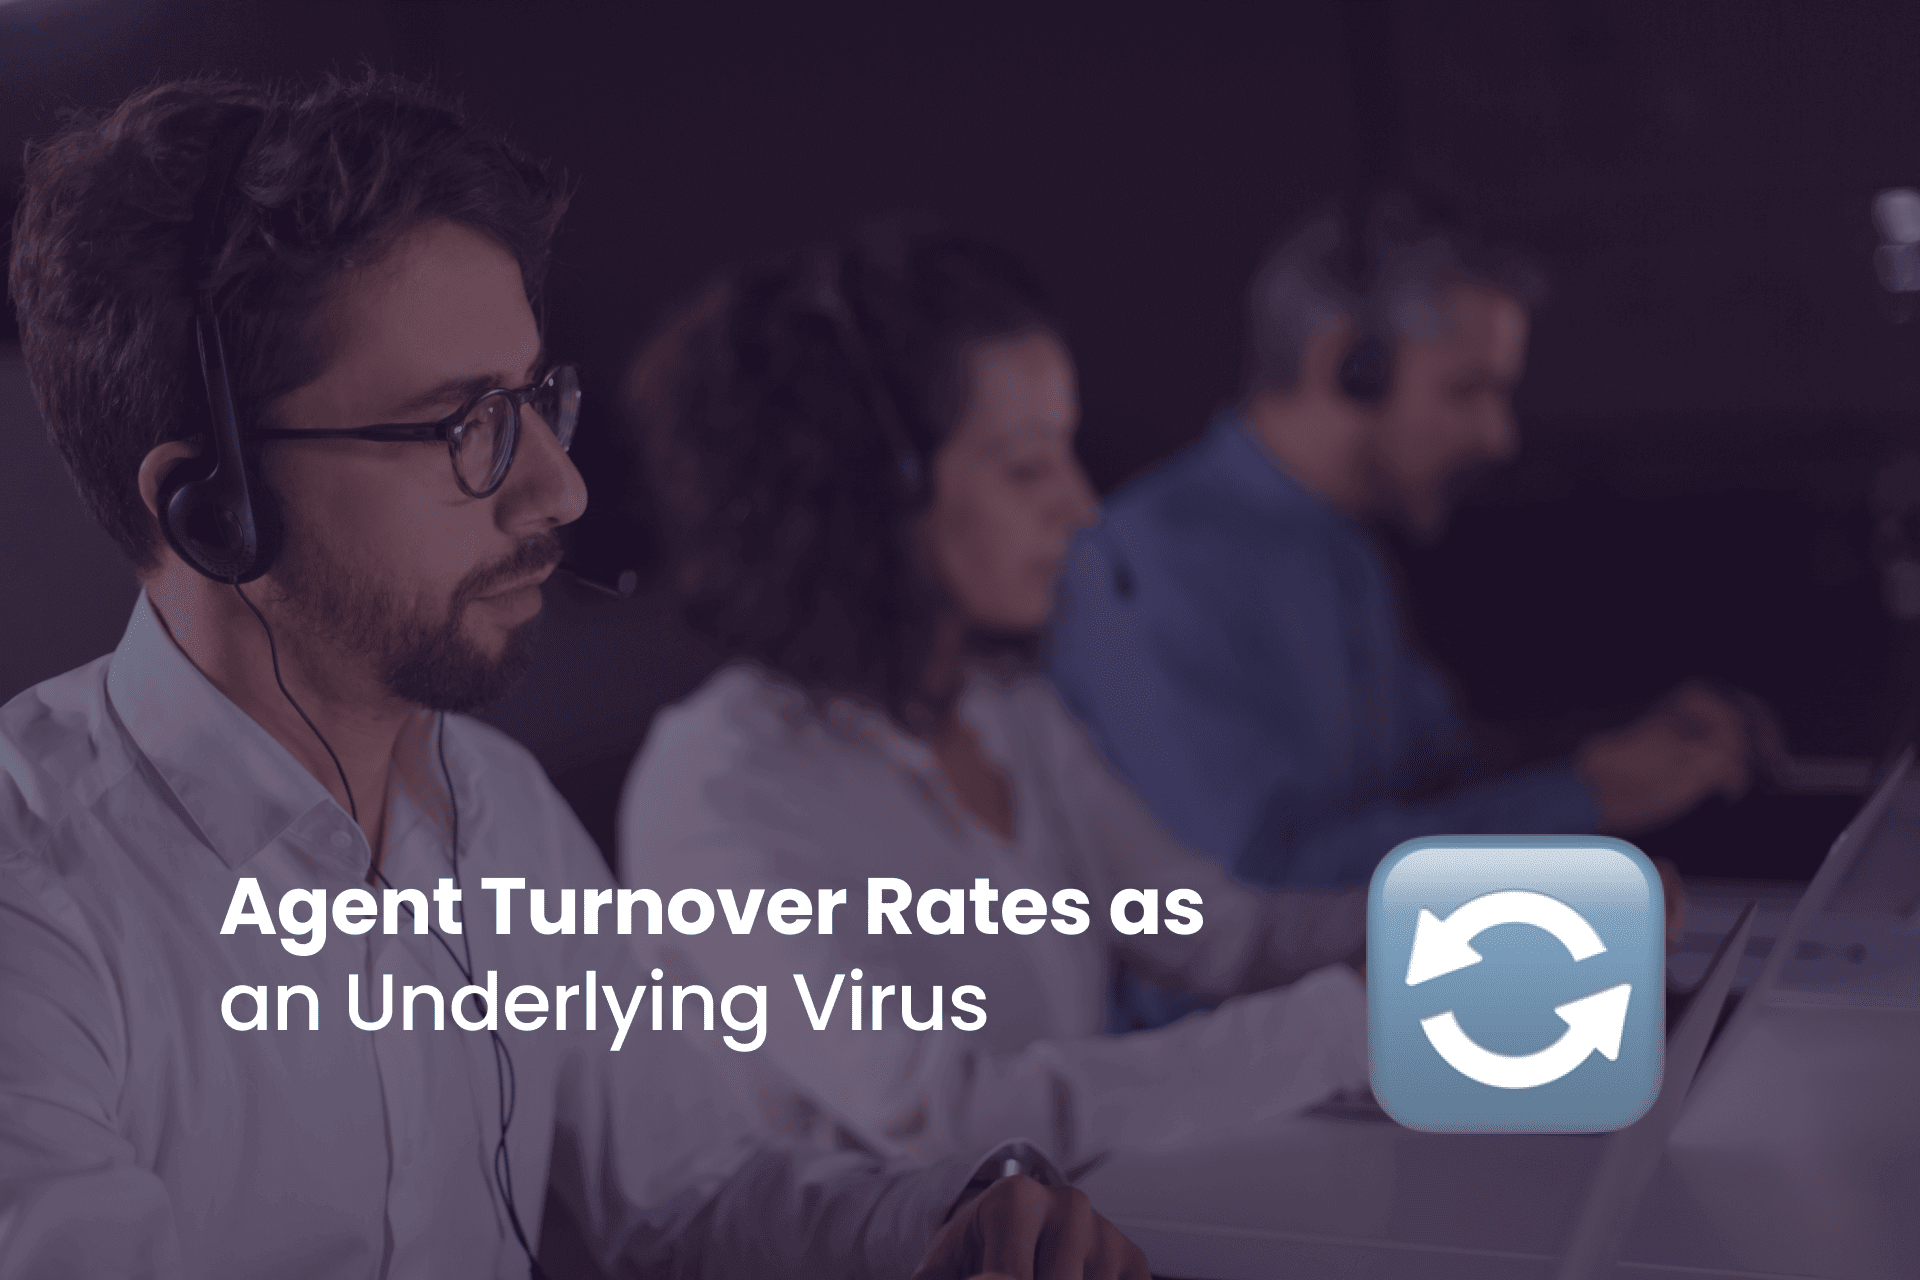 Agent Turnover Rates as an Underlying Virus